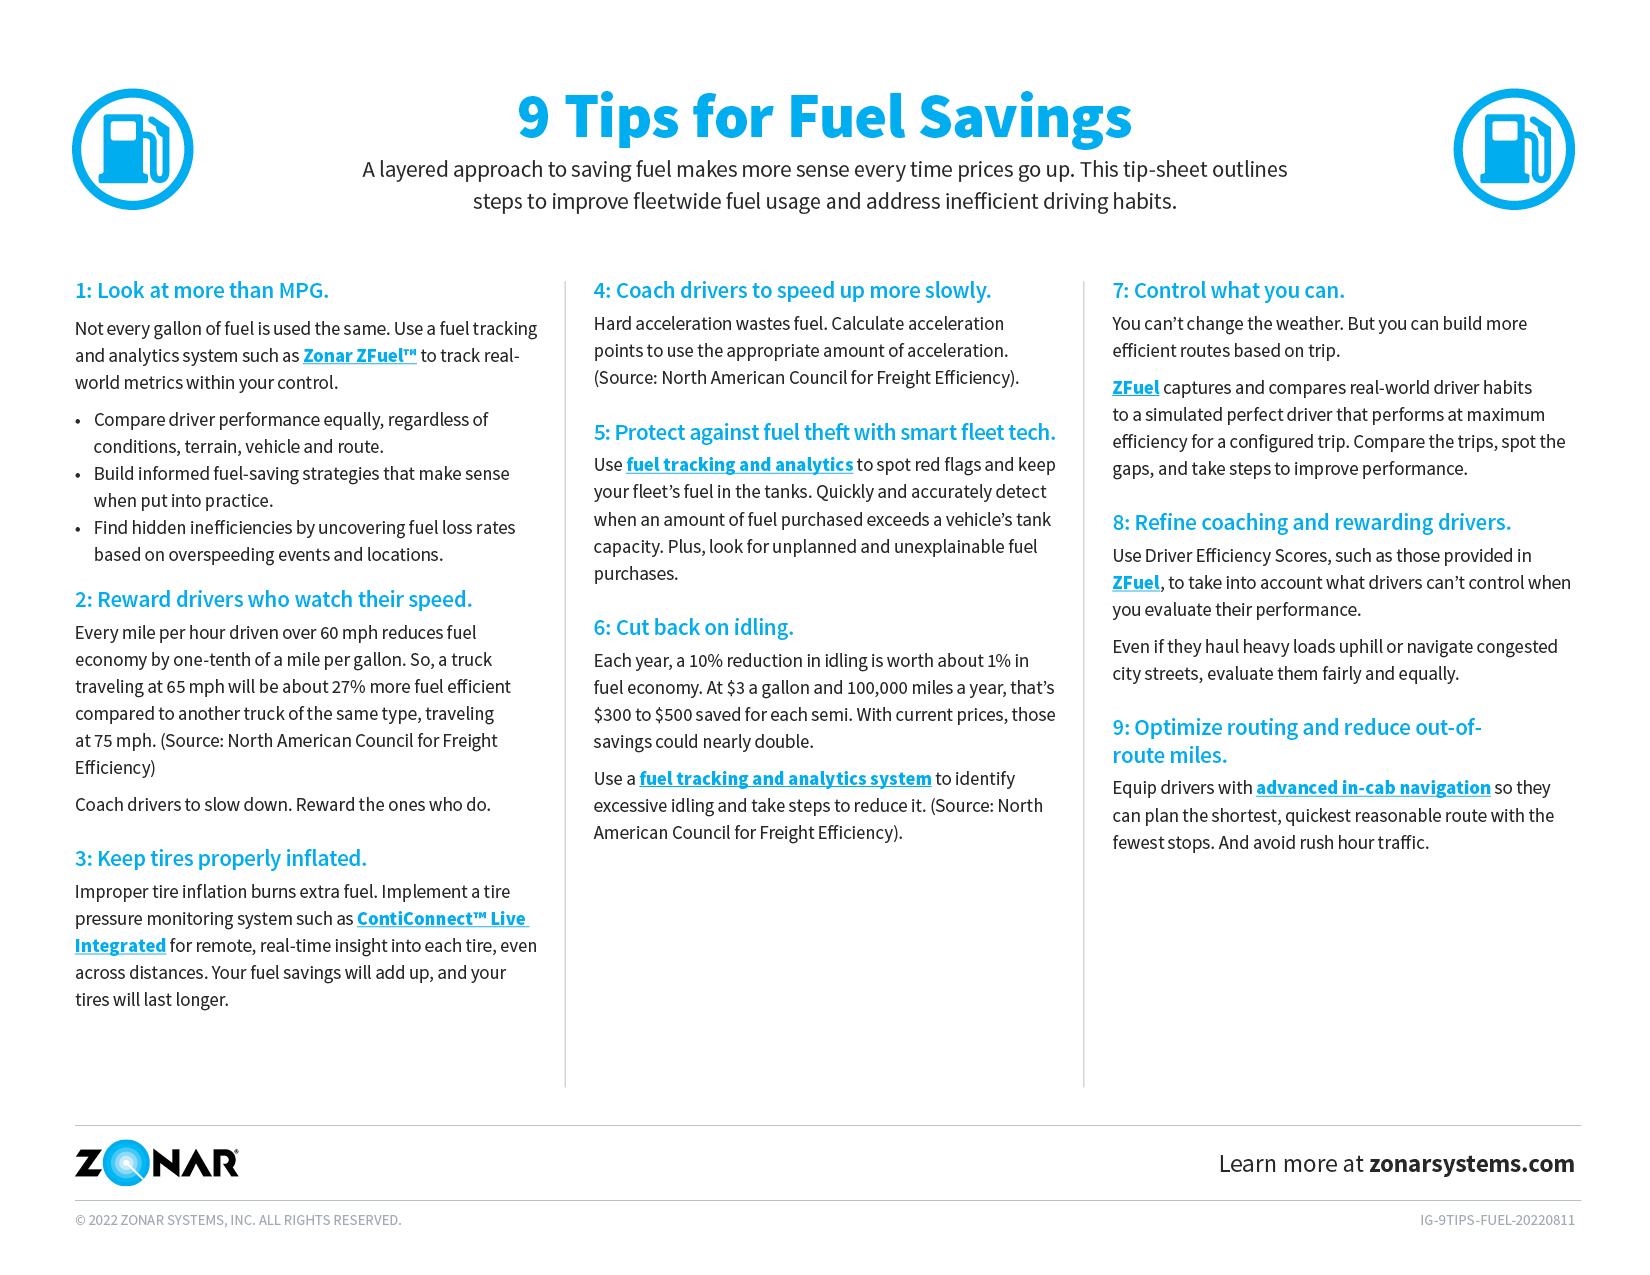 Find valuable tips to save money of your fleet's fuel cost with Zonar Systems.